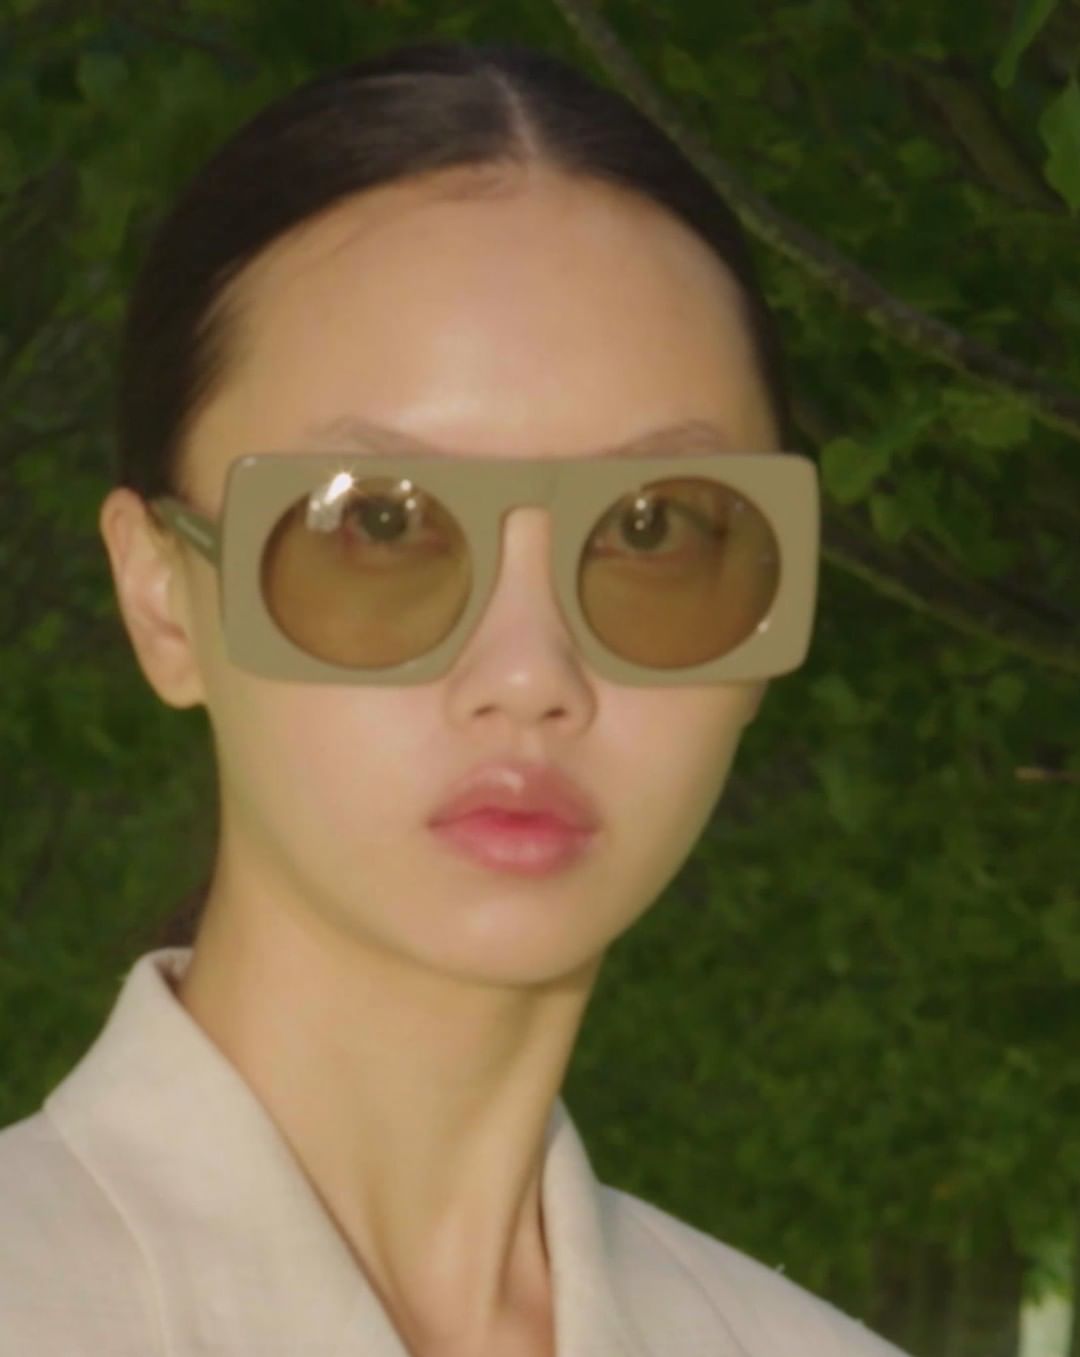 Stella McCartney - Our McCartney A to Z Manifesto: Summer 2021 Show reflects our return to the world – more mindful and accountable to our values, made with sustainable materials like organic cotton,...